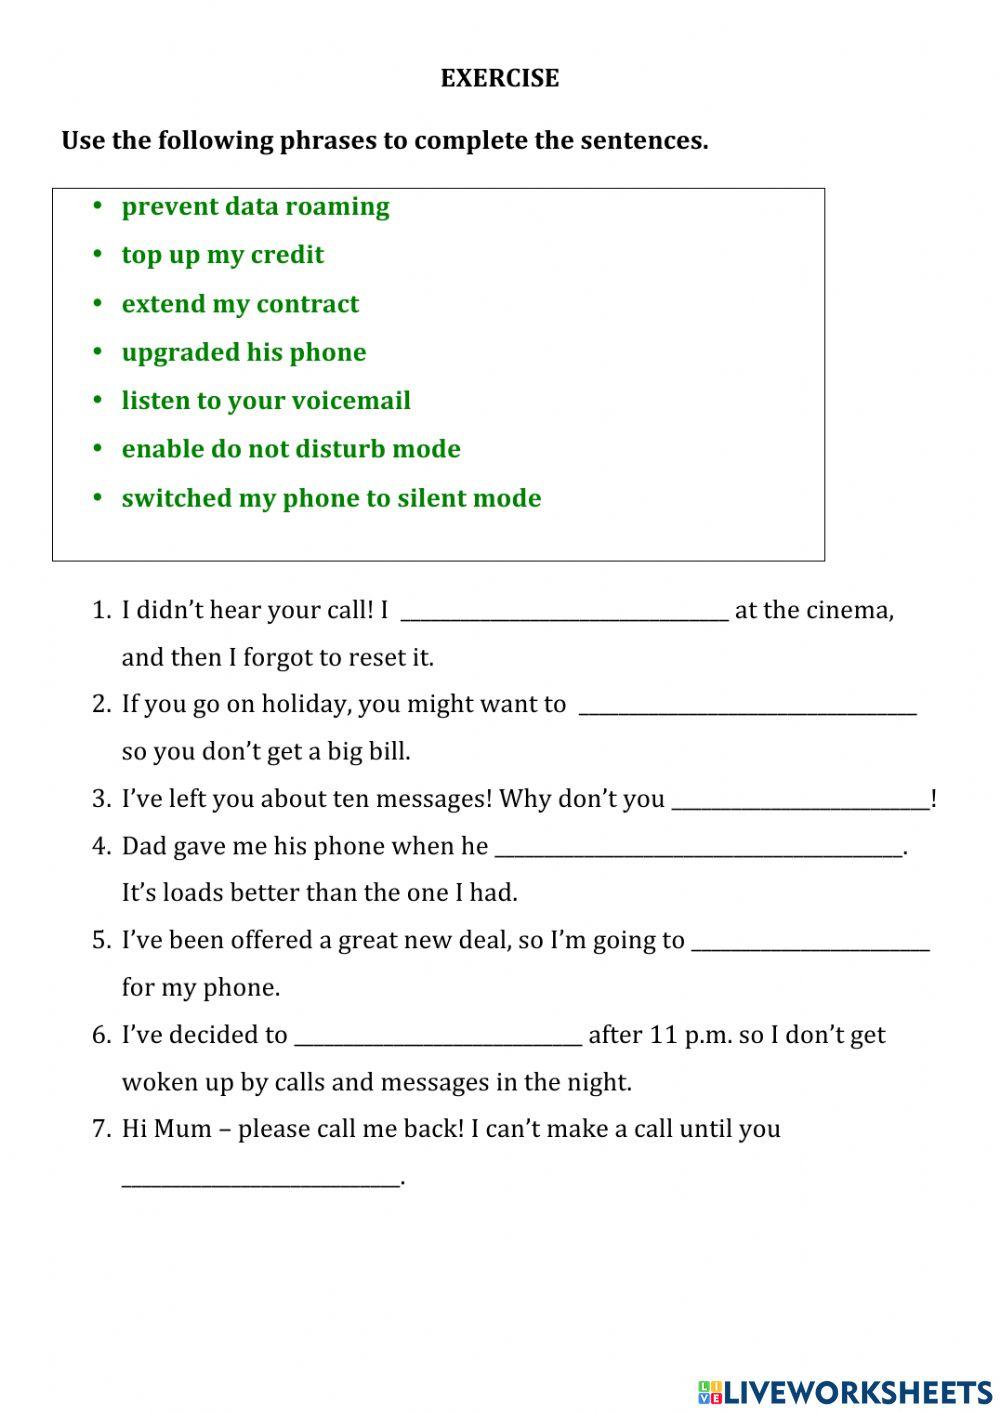 Phrases for using your mobile phone